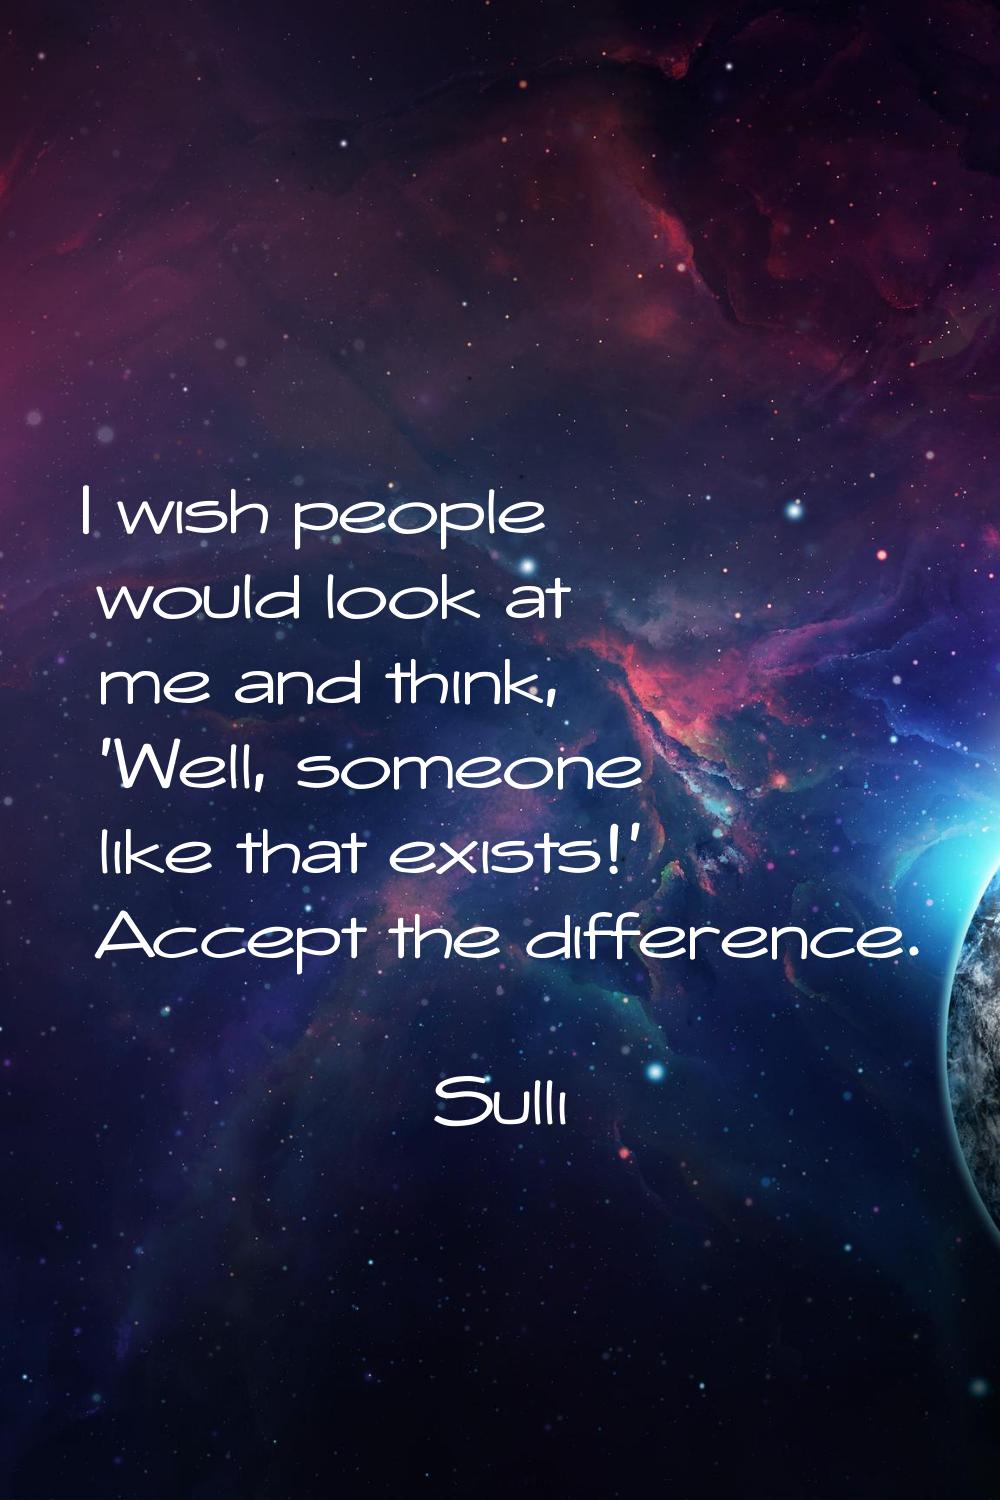 I wish people would look at me and think, 'Well, someone like that exists!' Accept the difference.